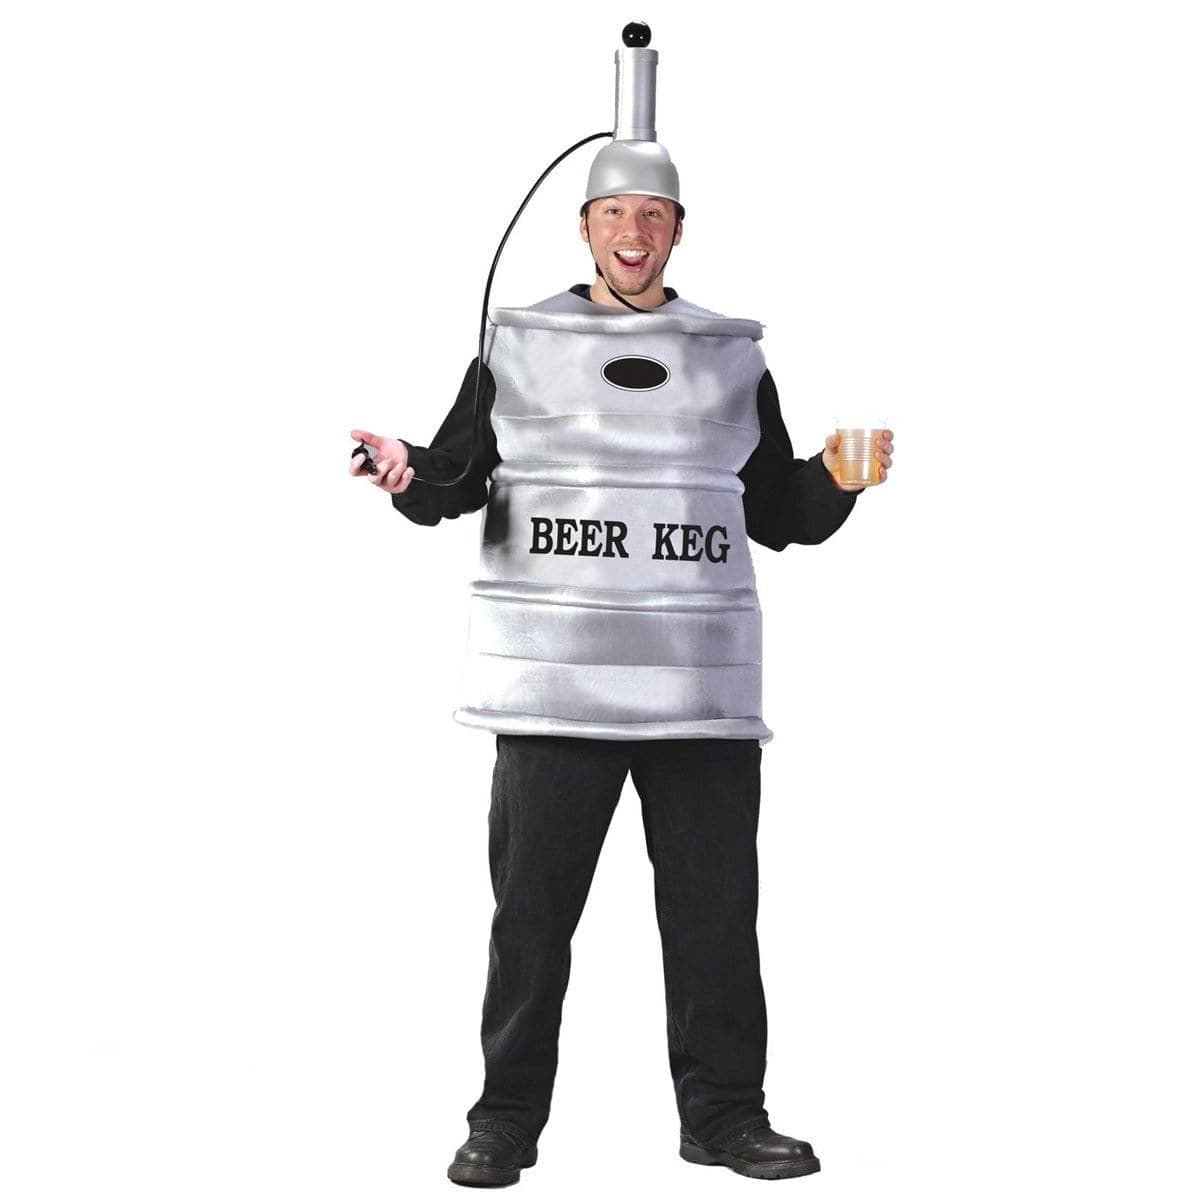 Buy Costumes Beer Keg Costume for Adults sold at Party Expert